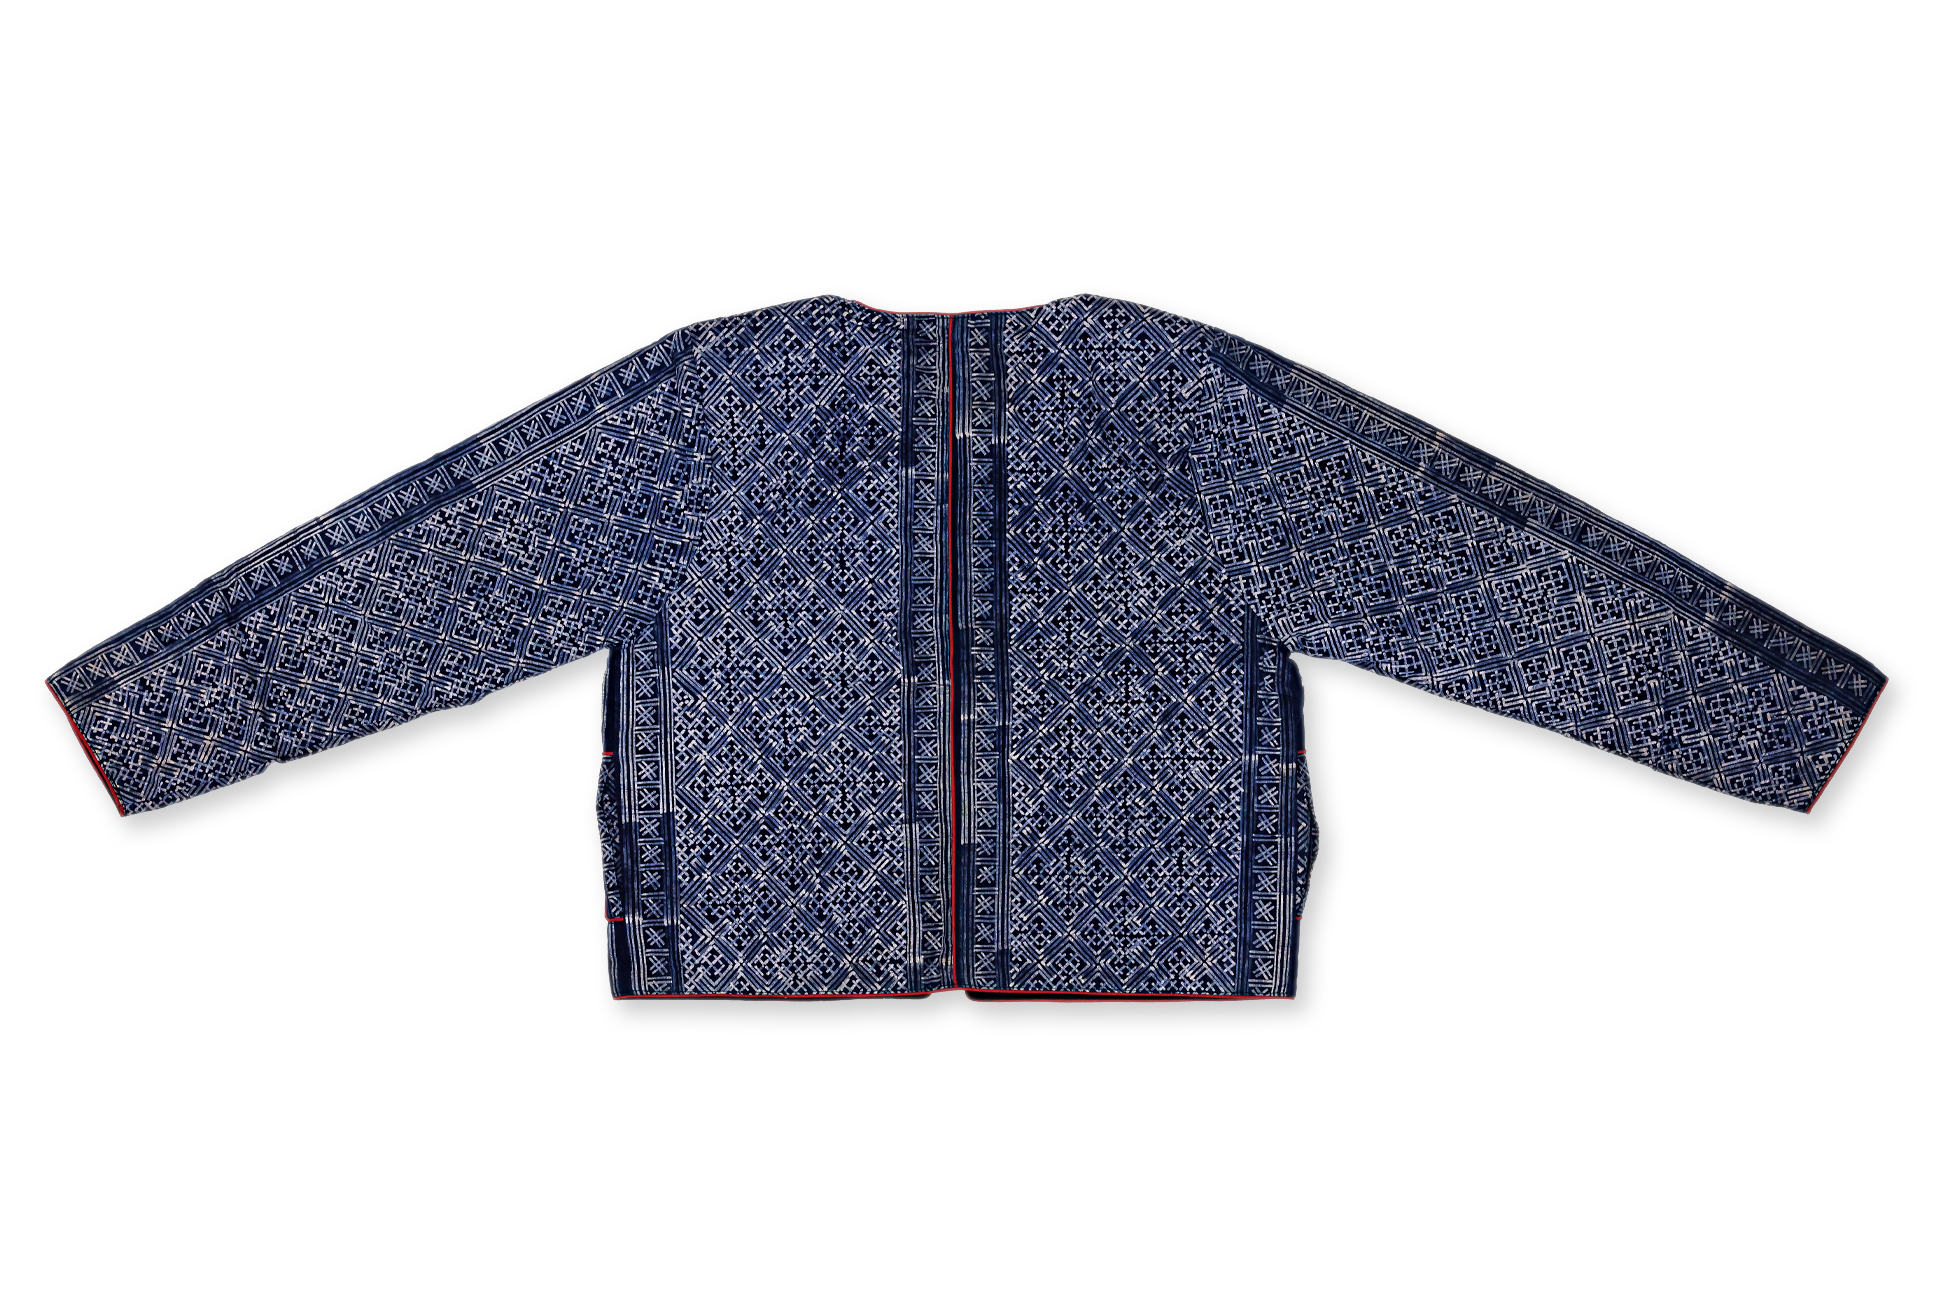 A CHINESE MIAO BATIK DYED BLUE COAT - Image 2 of 3